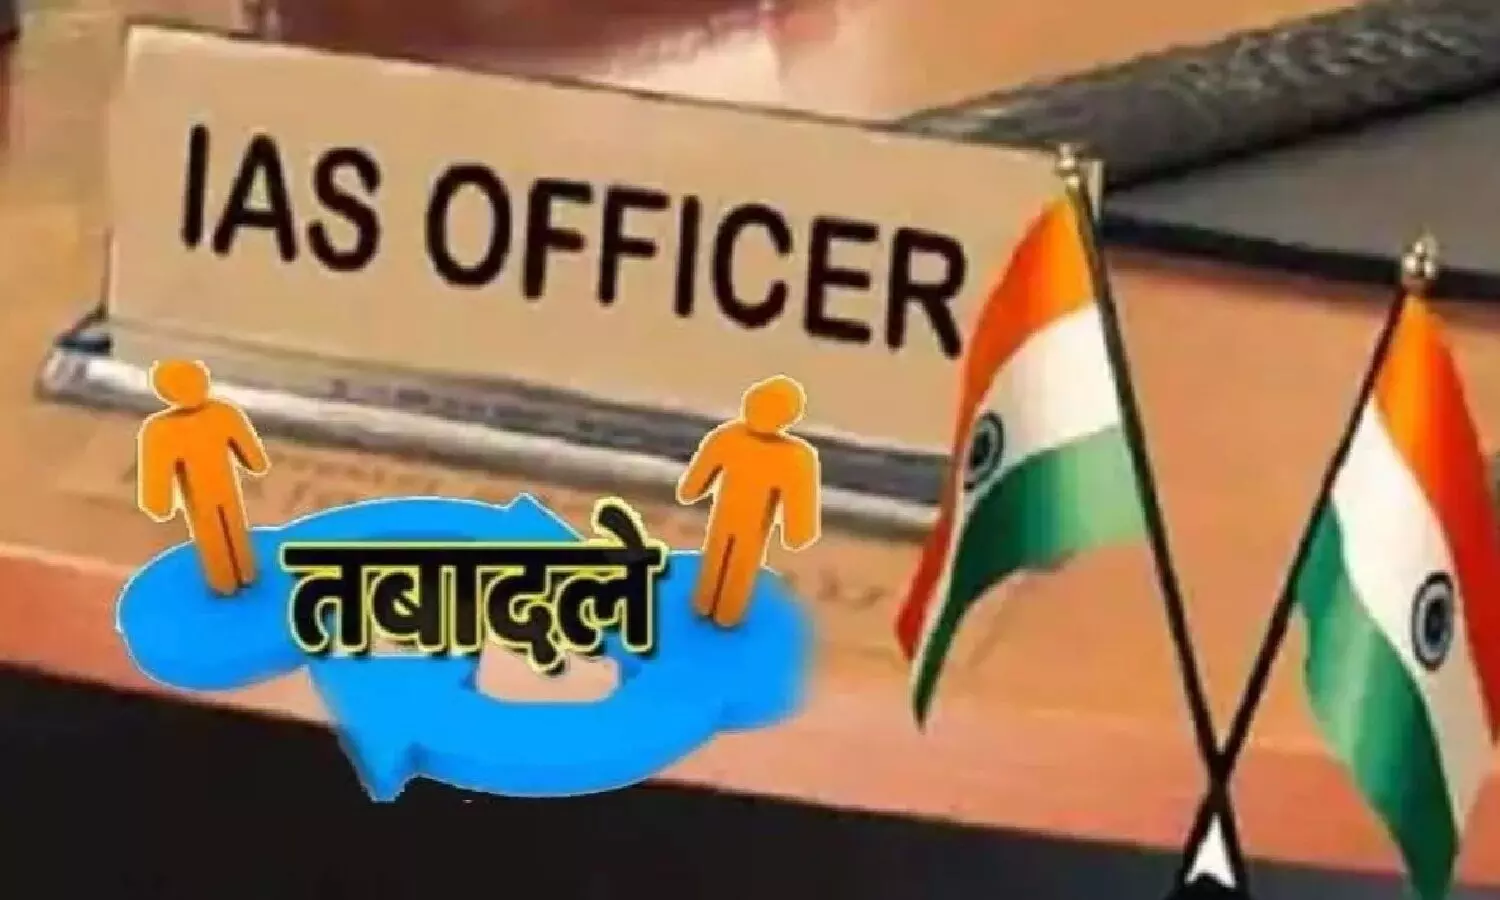 IAS Transfer in UP